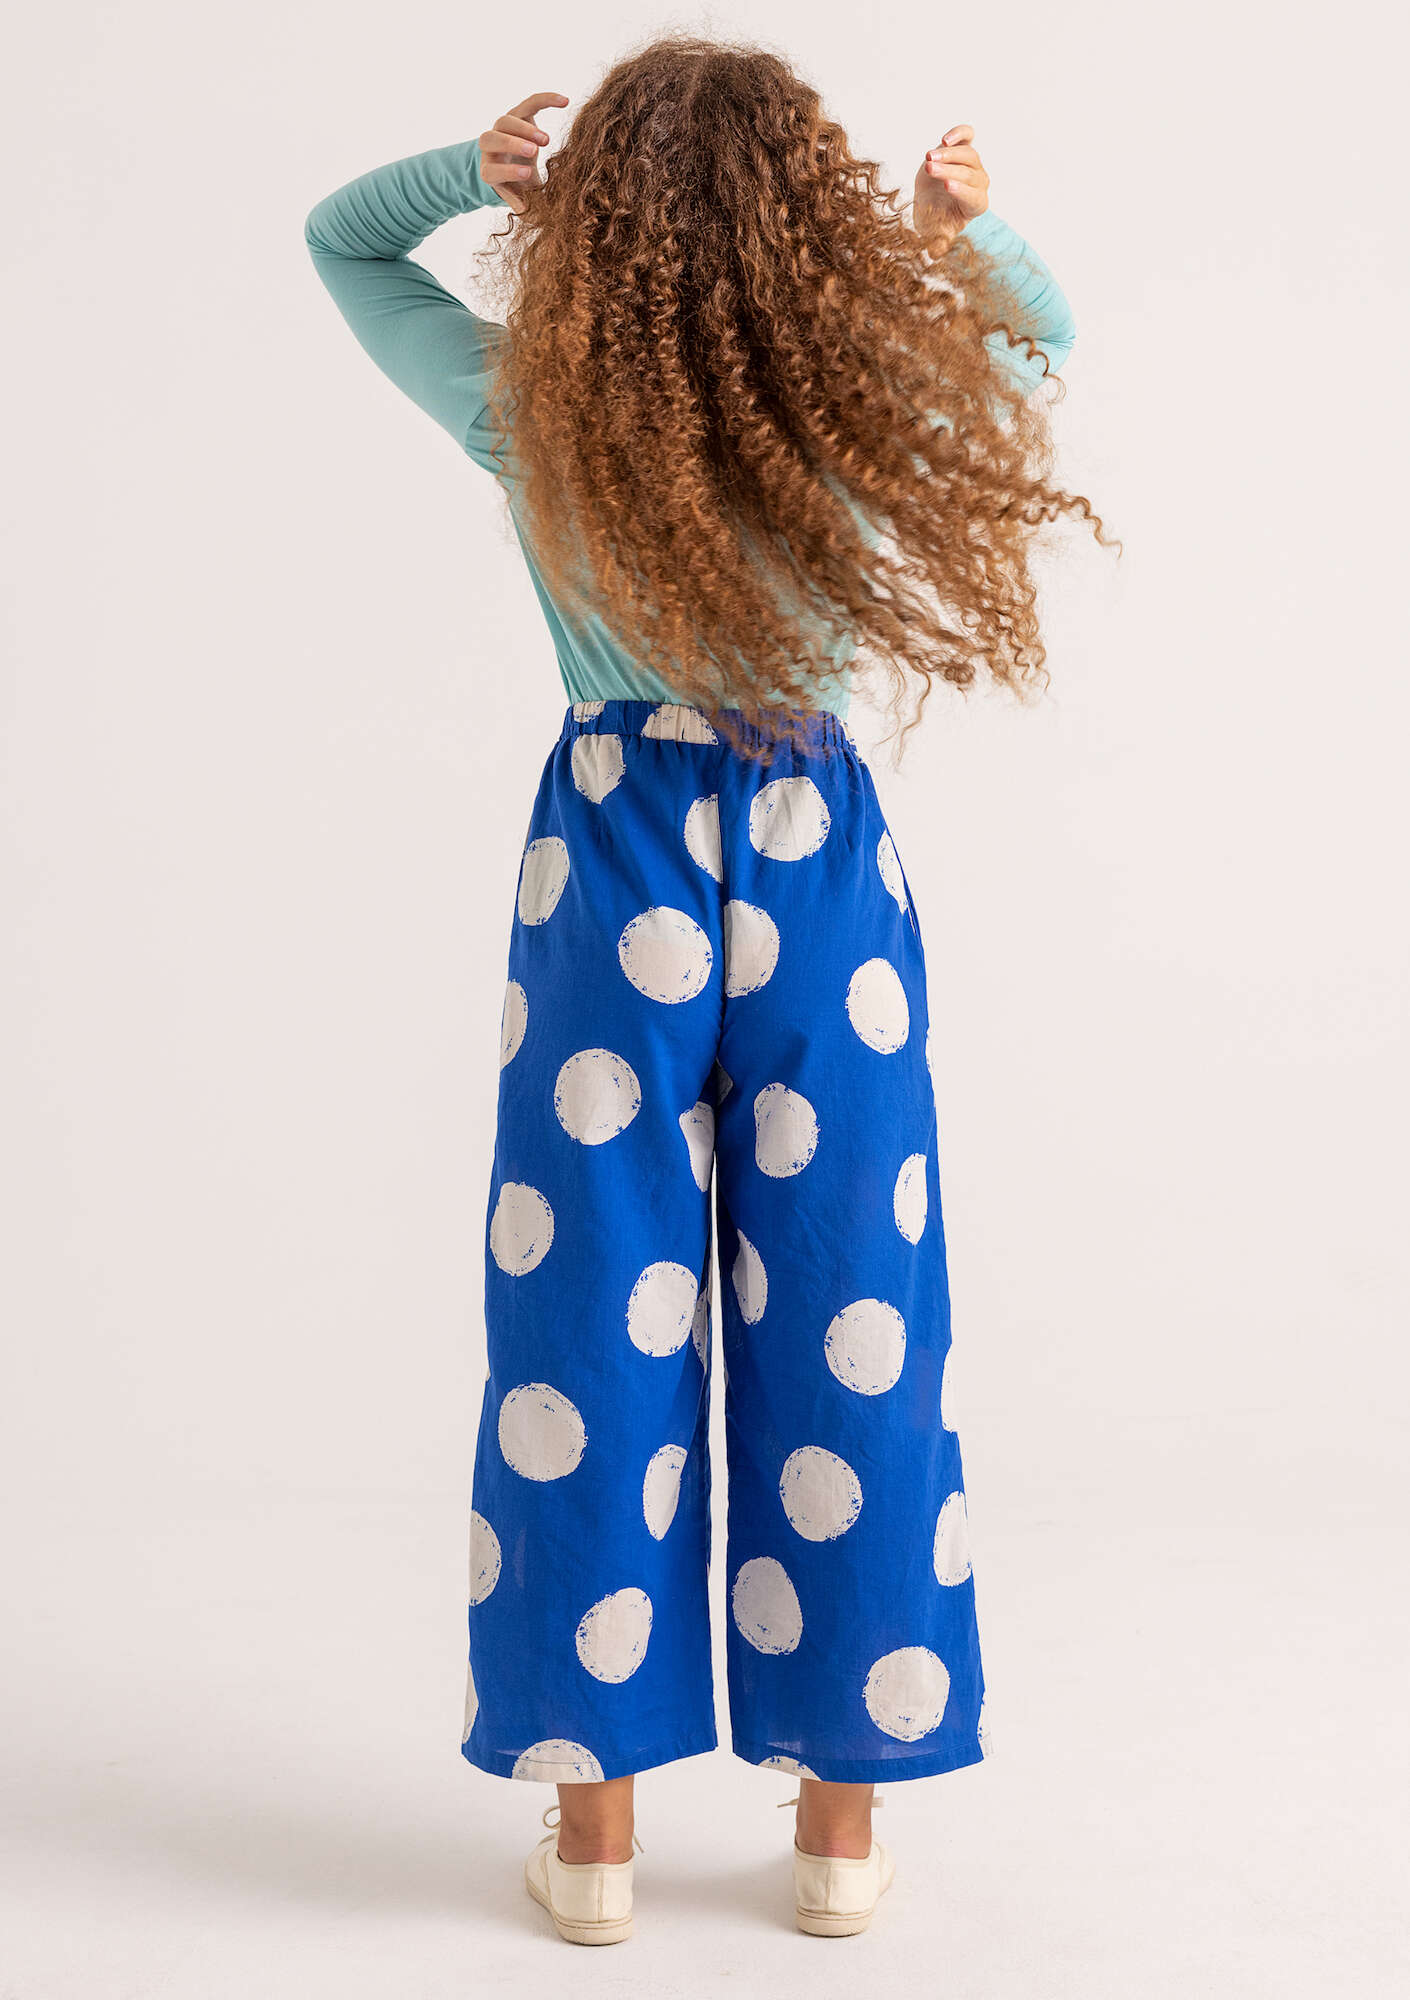  Woven “Palette” pants in organic cotton sapphire blue/patterned